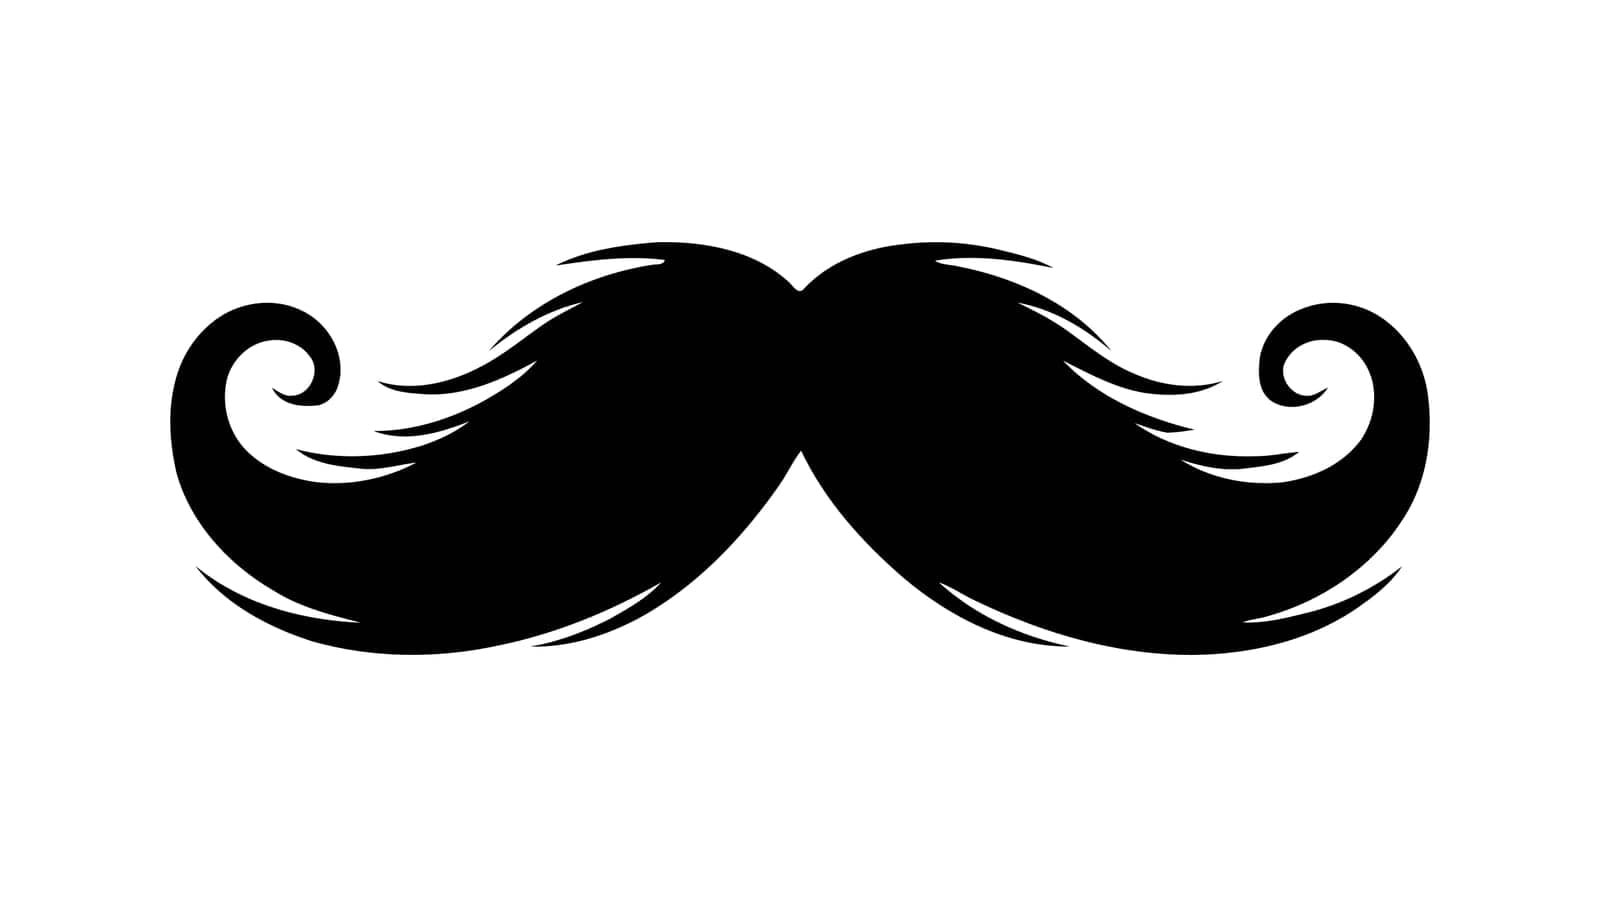 Italy mustache icon. Simple illustration of italy mustache vector icon for web.